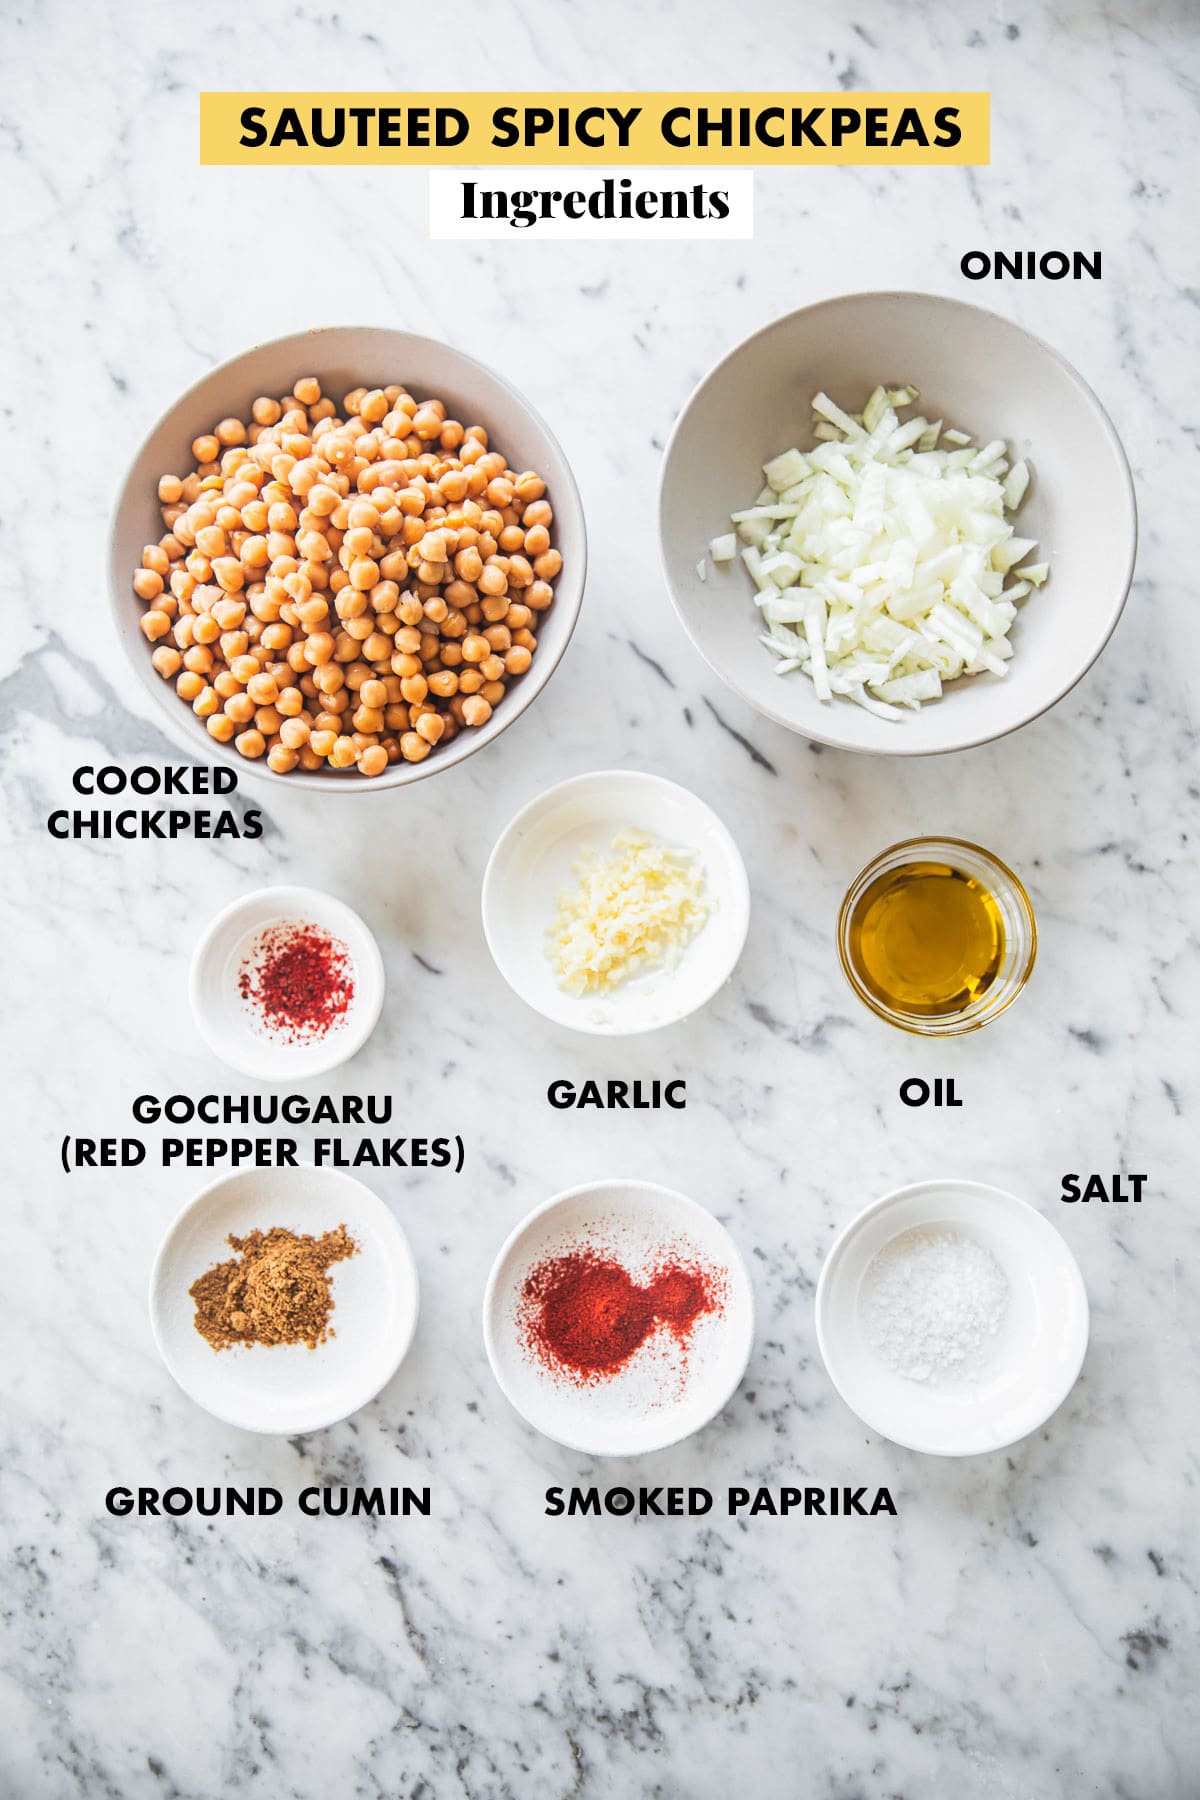 Ingredients for Sauteed Spicy Chickpeas, measured and labeled.